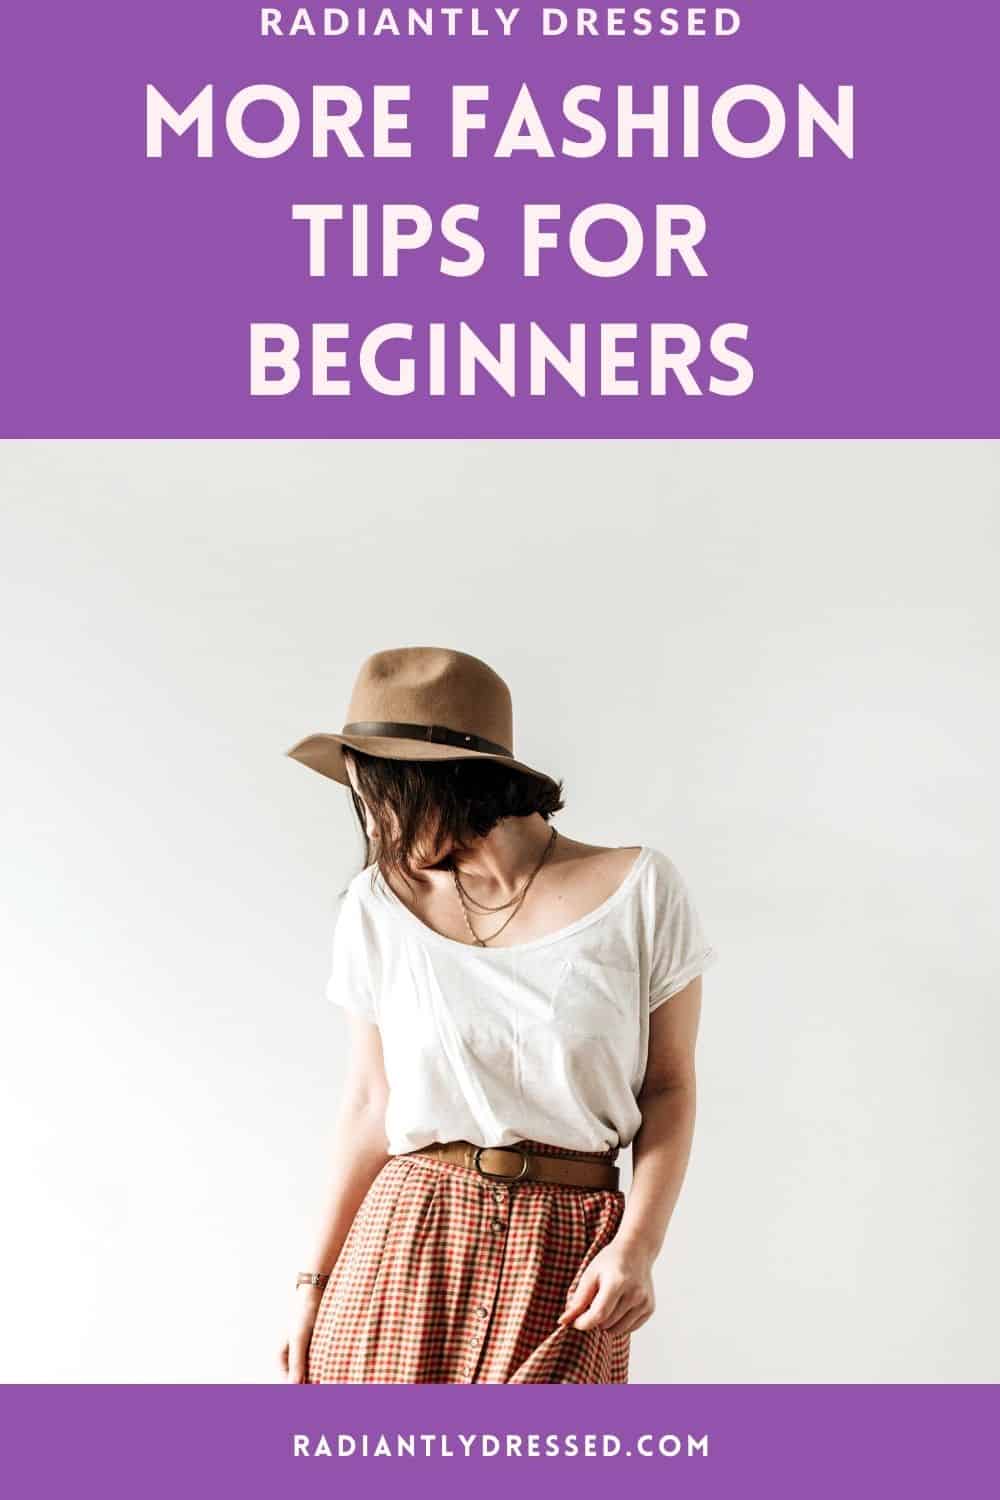 More Fashion Tips for Beginners: 5 Tips to Get Started on Building your ...